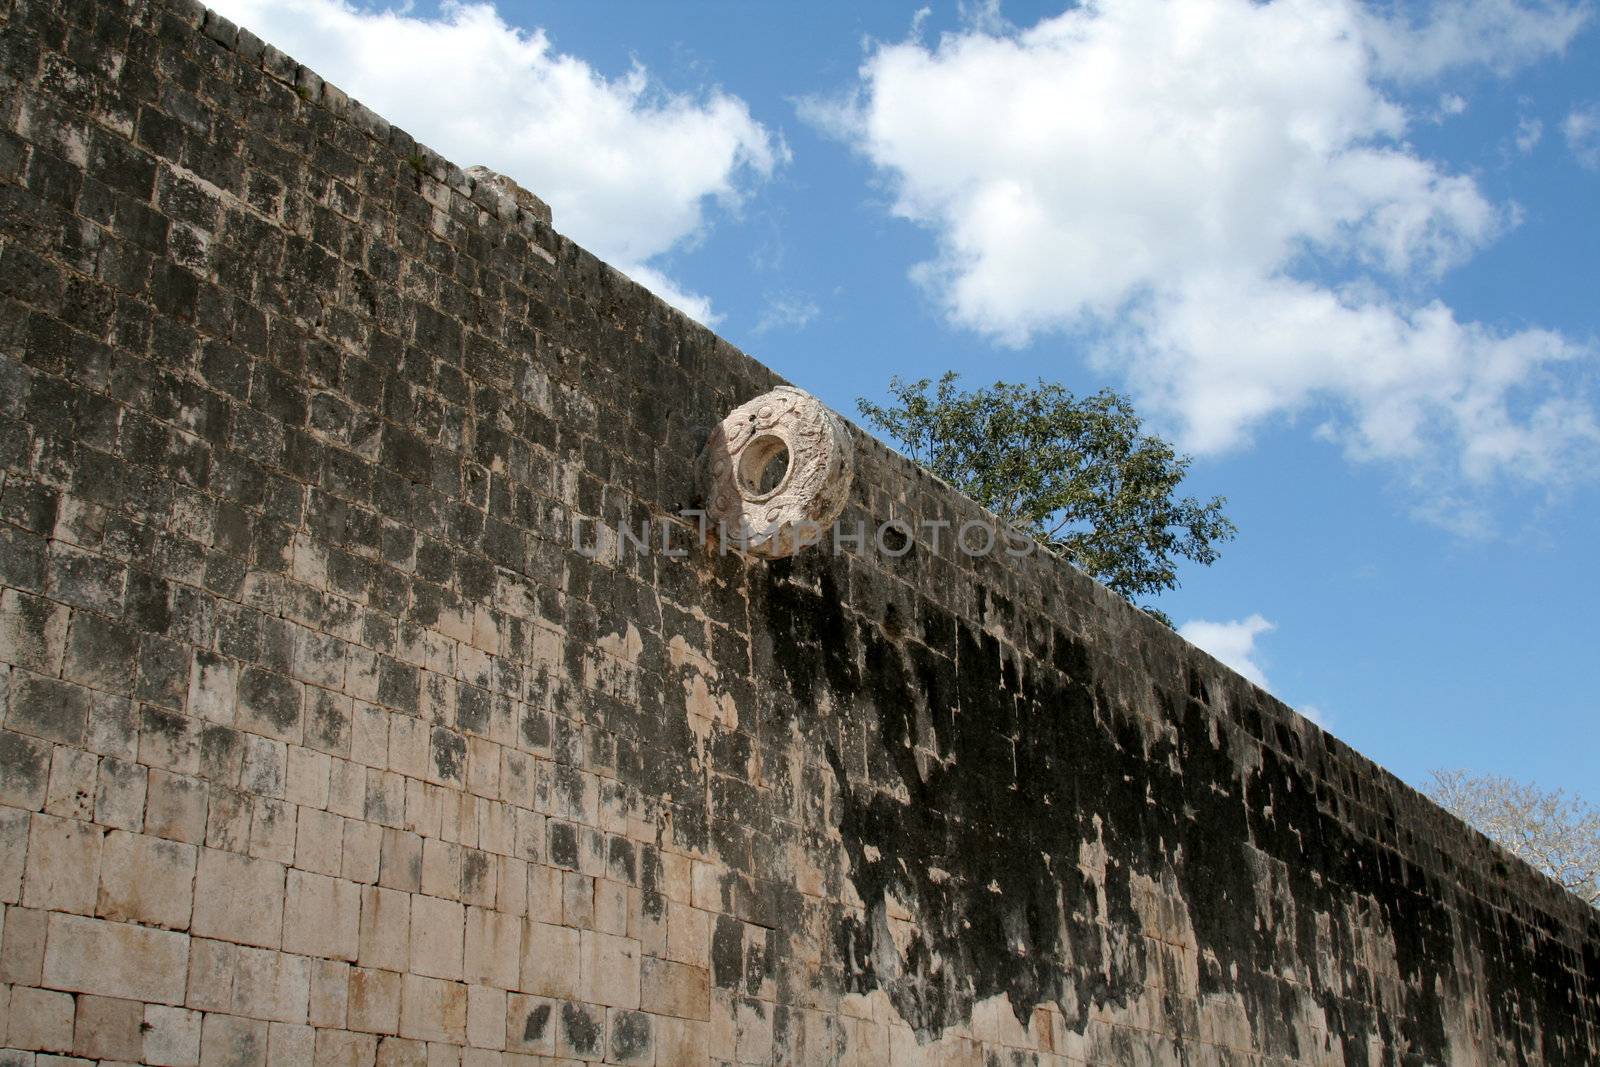 A goal at the great ballcourt at Chichen Itza, (Mayan Ruins) in Mexico.
